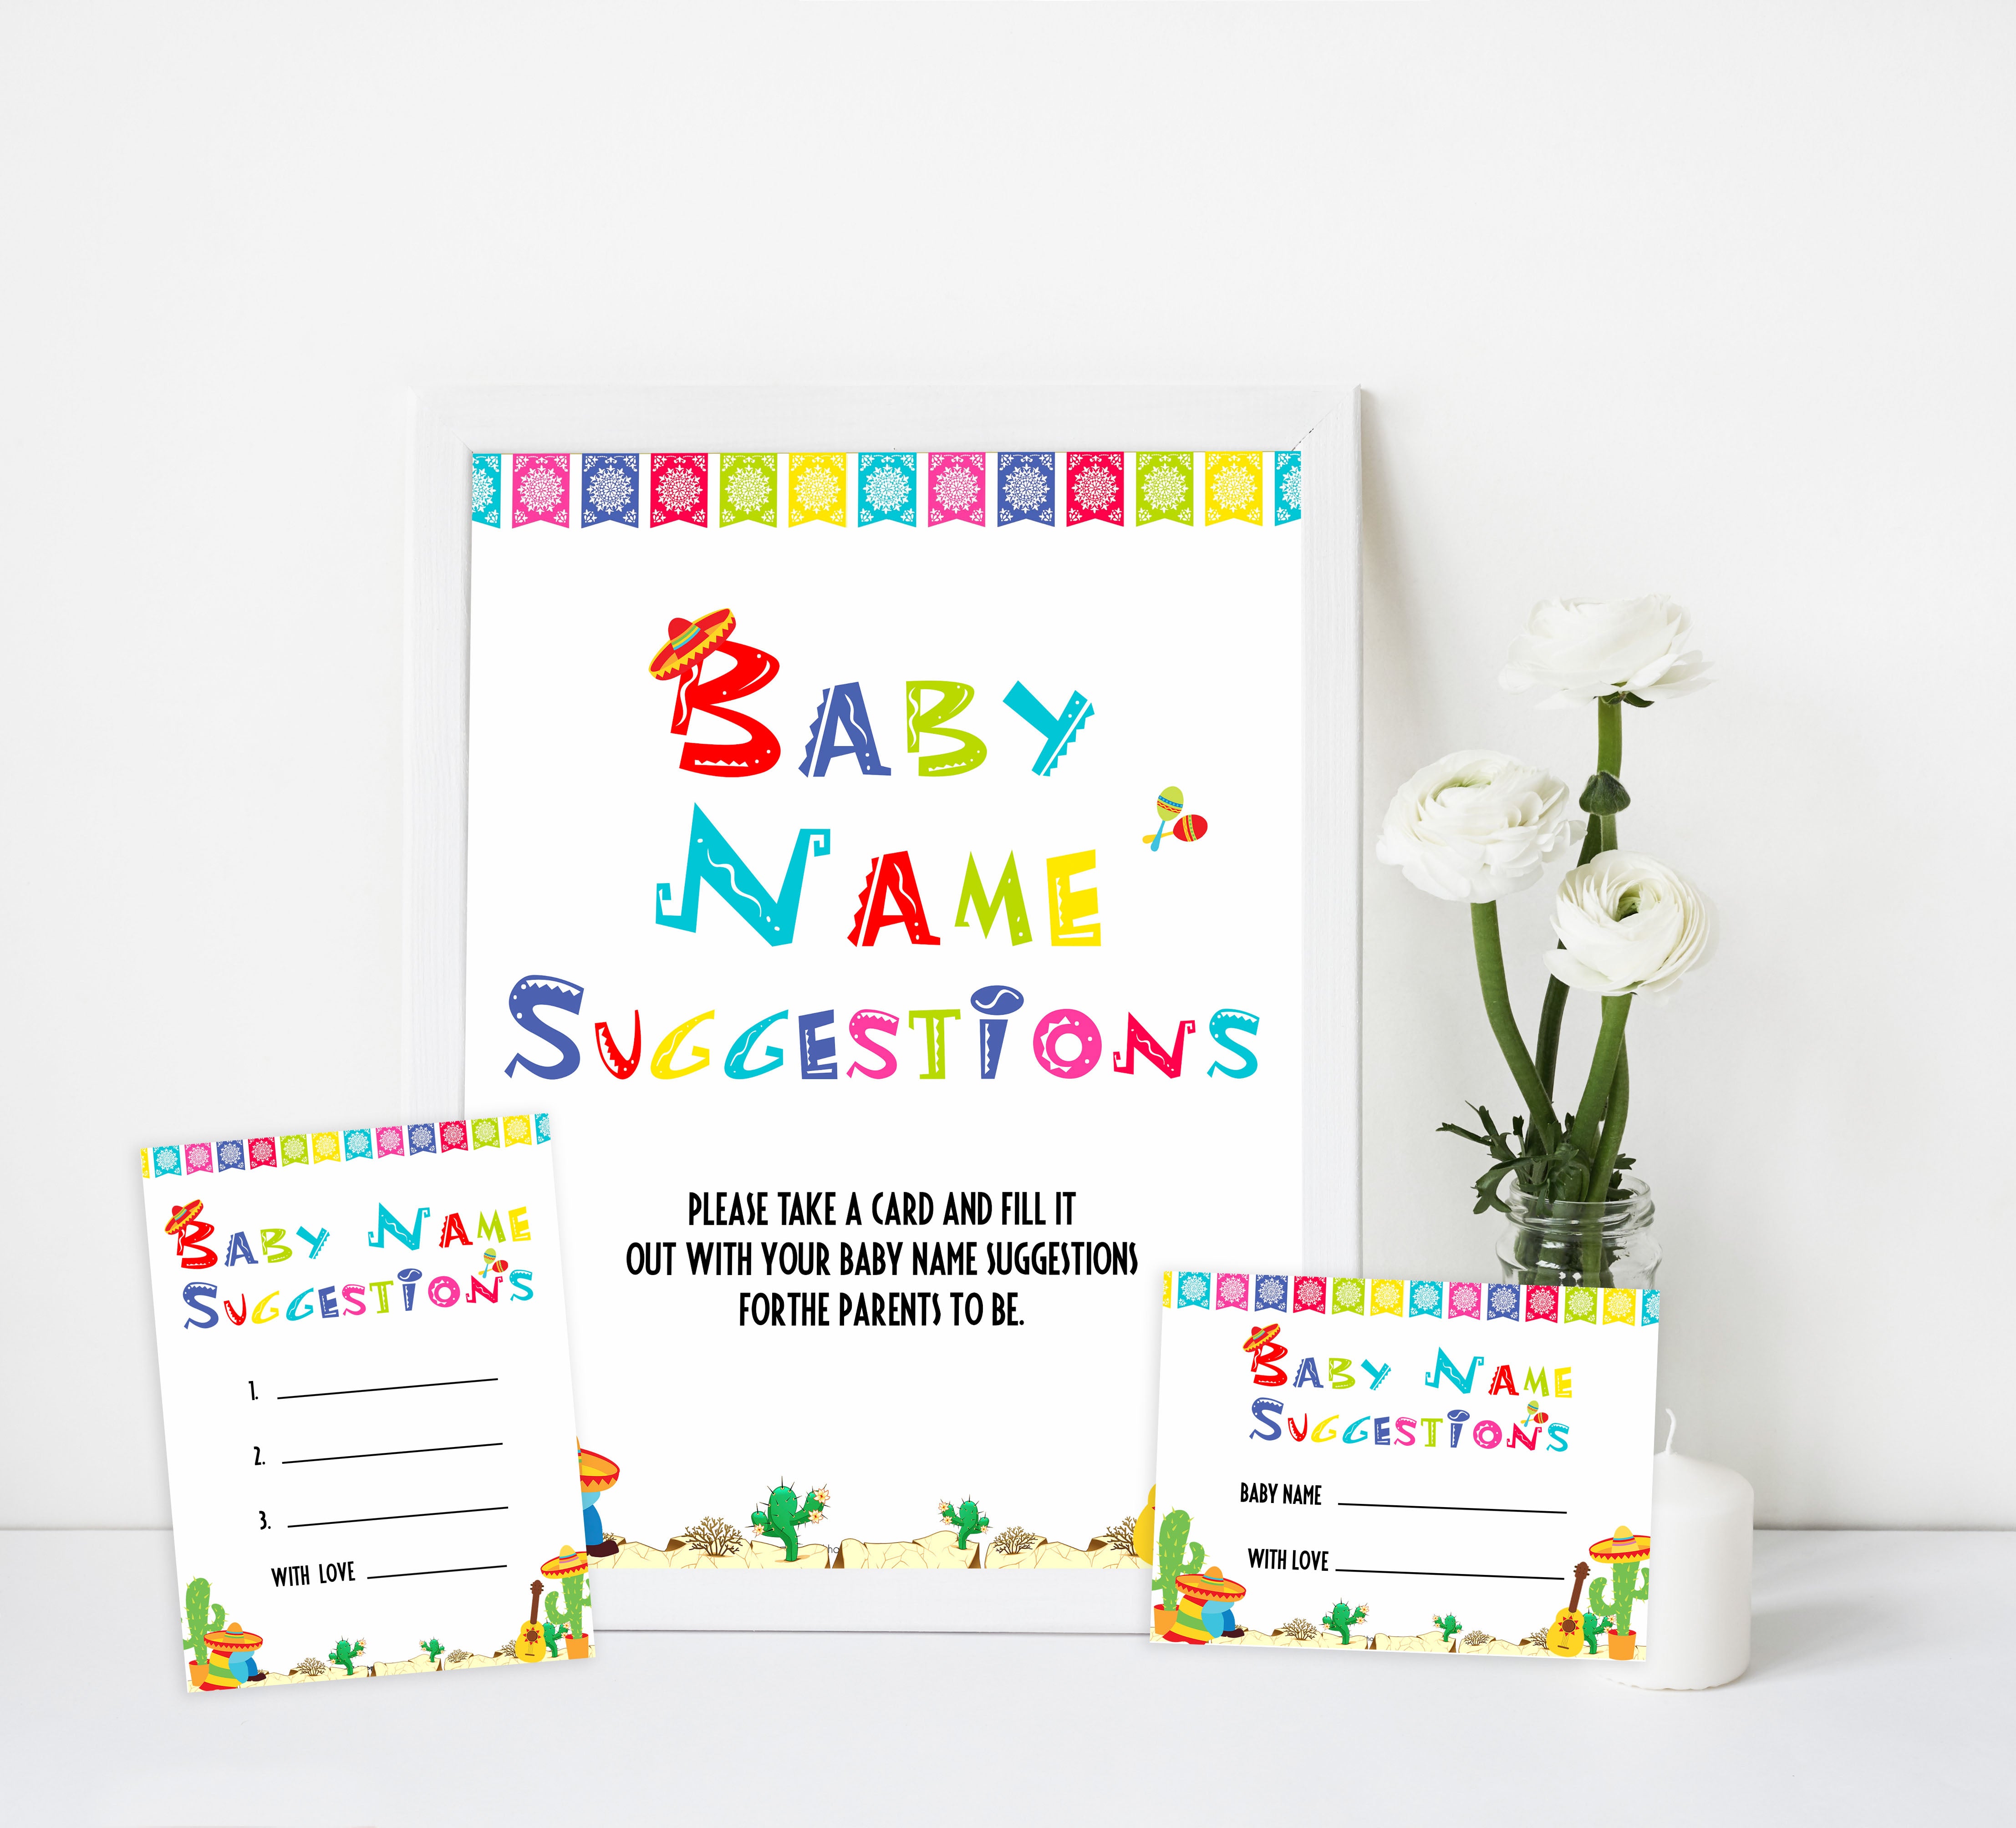 baby name suggestions game, baby suggestions, Printable baby shower games, Mexican fiesta fun baby games, baby shower games, fun baby shower ideas, top baby shower ideas, fiesta shower baby shower, fiesta baby shower ideas